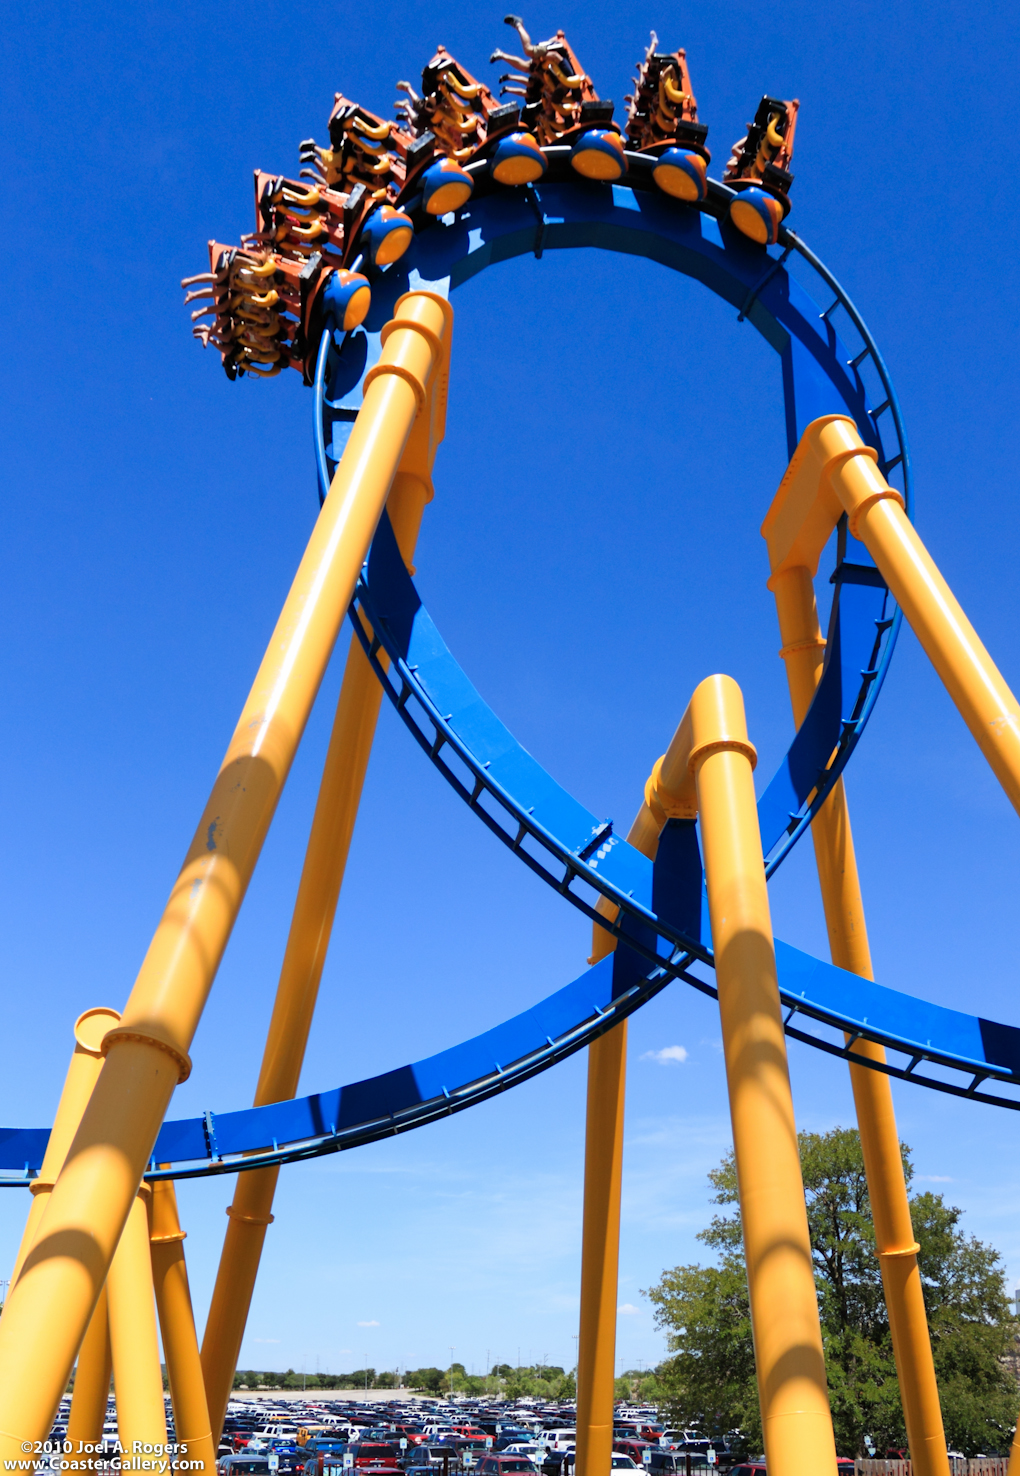 Goliath roller coasters at many Six Flags parks